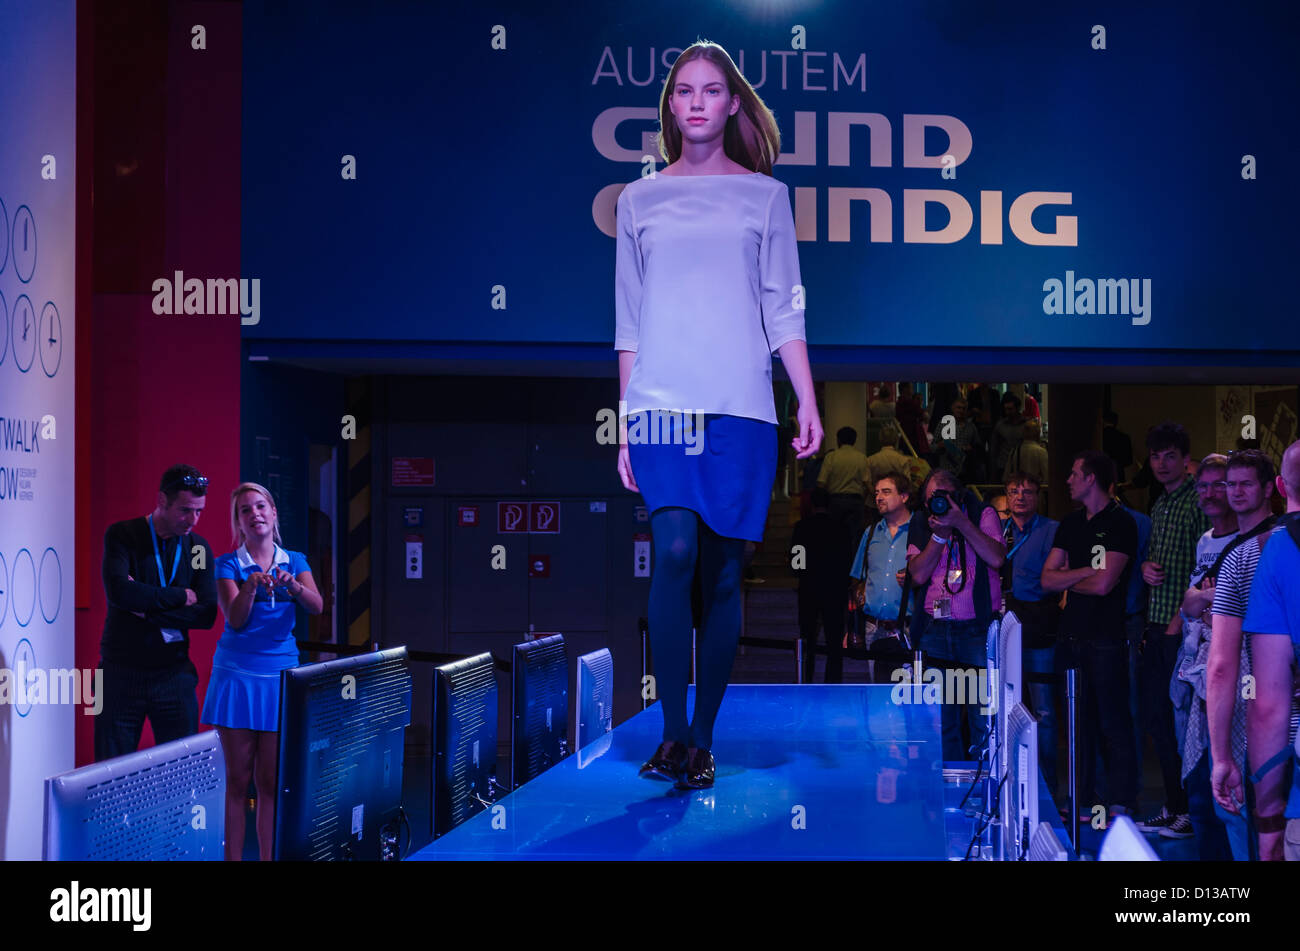 IFA - International Consumer Electronics Fair in Berlin, Germany - Female model doing catwalk at fashion show at  Grundig stand Stock Photo